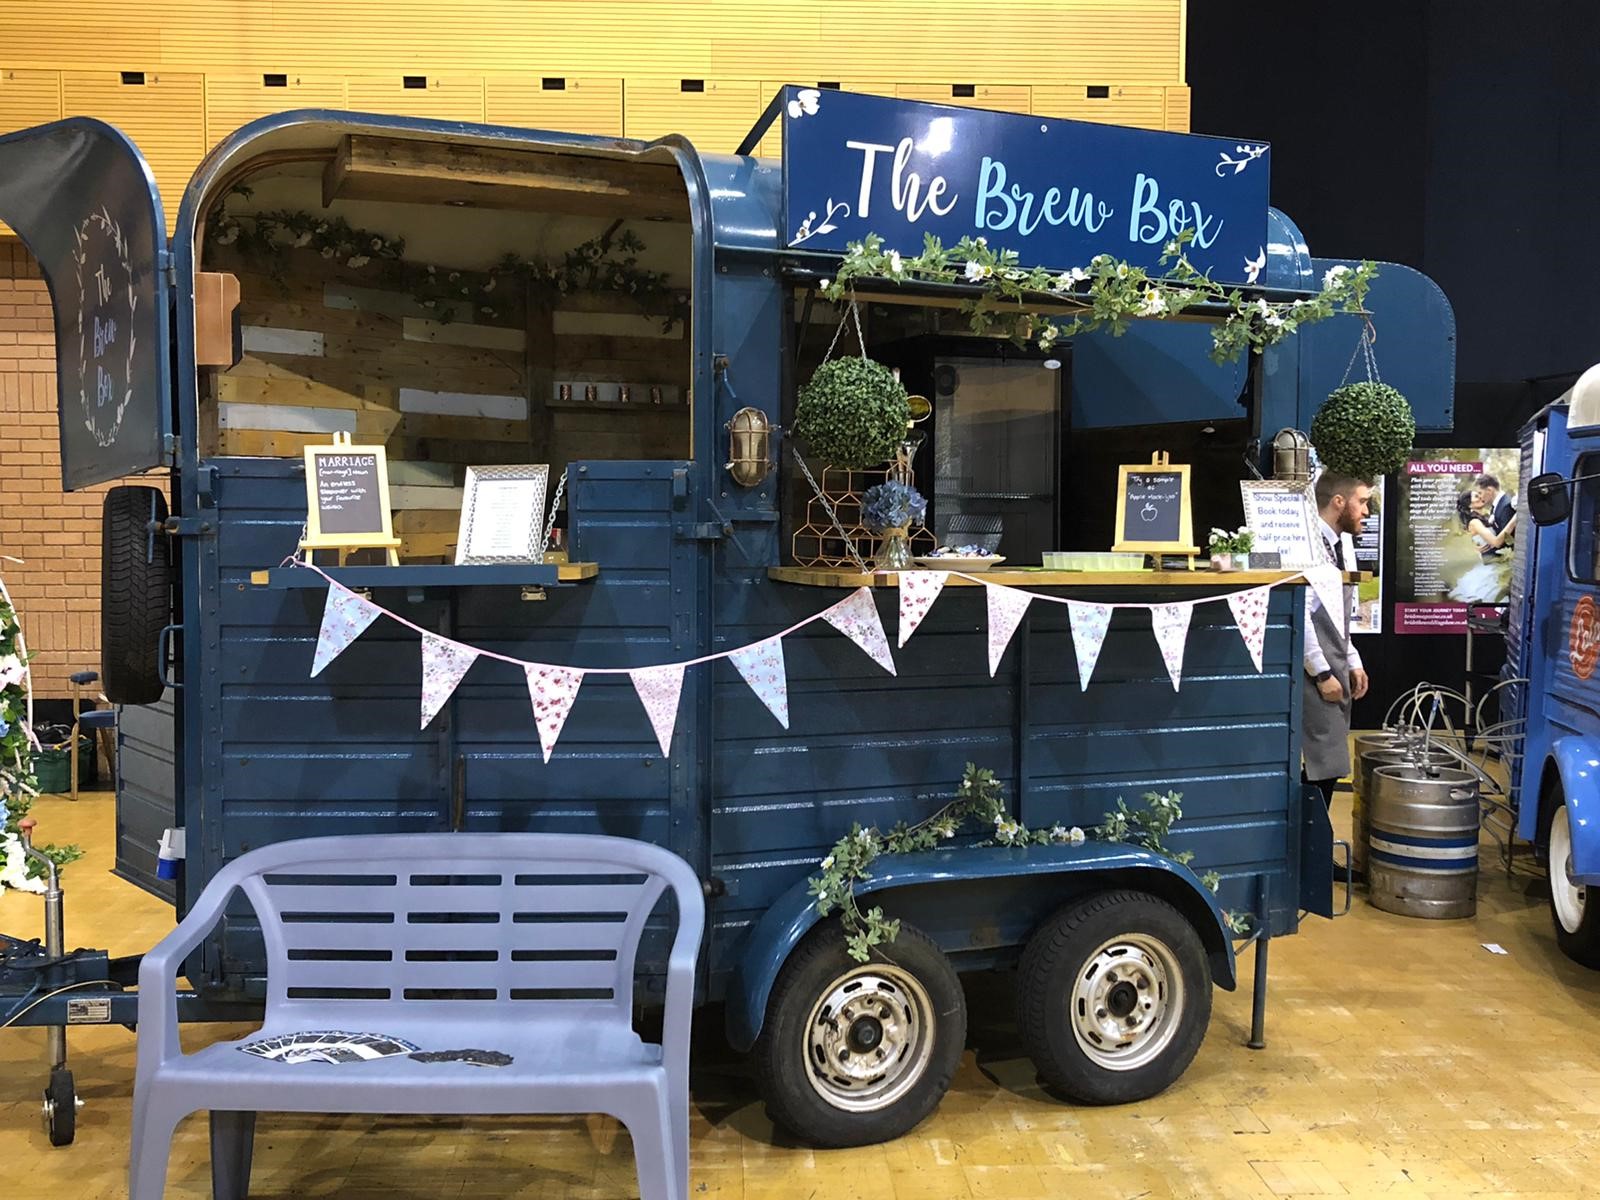 Brew Box at a Wedding Show, decorated with bunting